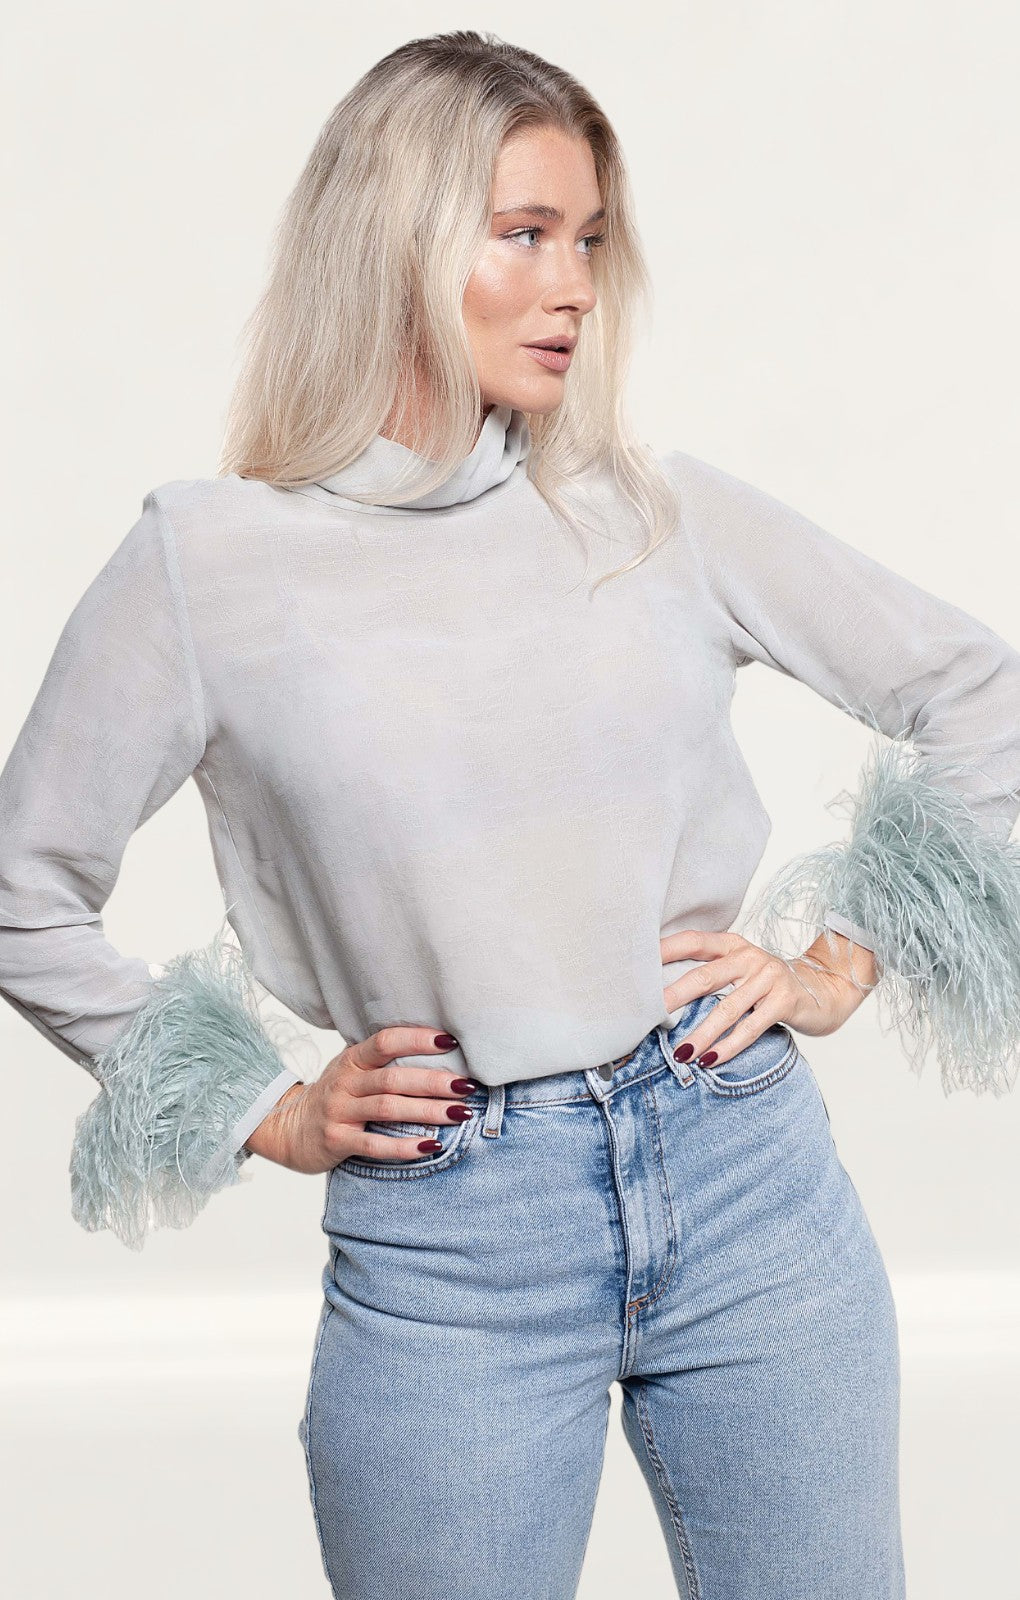 Zara Pearl Grey Blouse With Jacquard Feathers product image